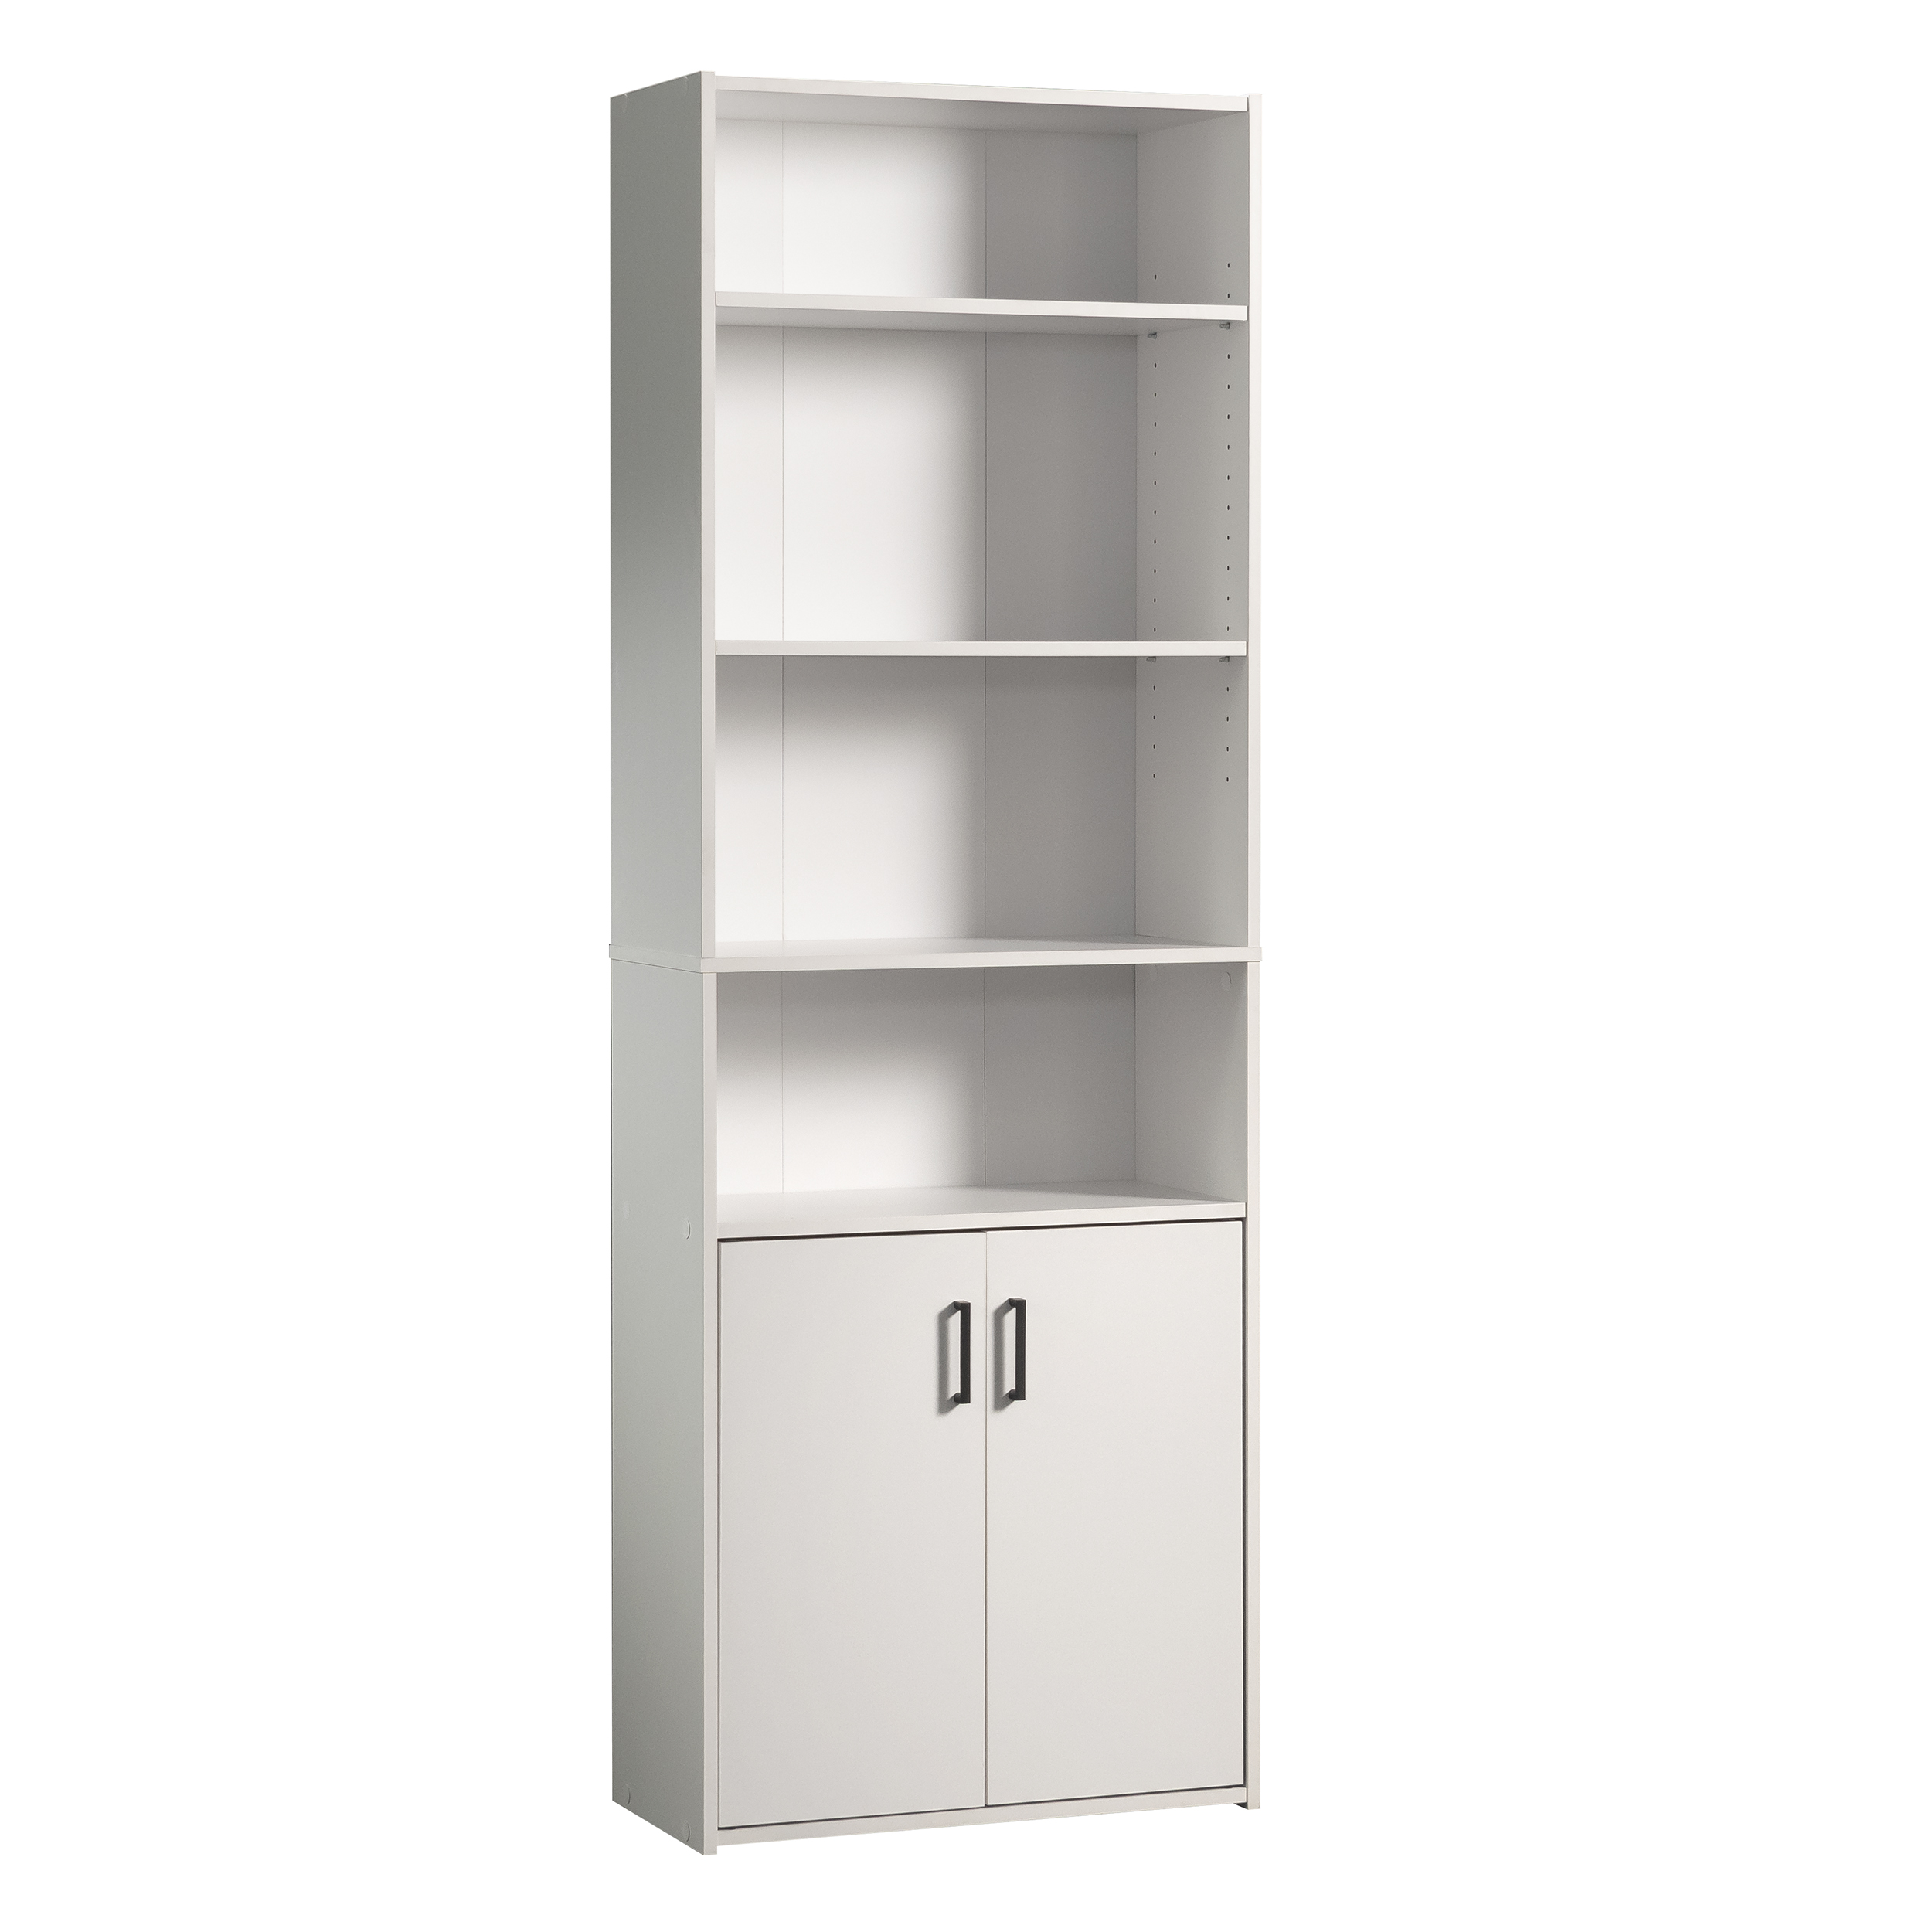 Mainstays Traditional 5 Shelf Bookcase with Doors, Soft White - image 1 of 5